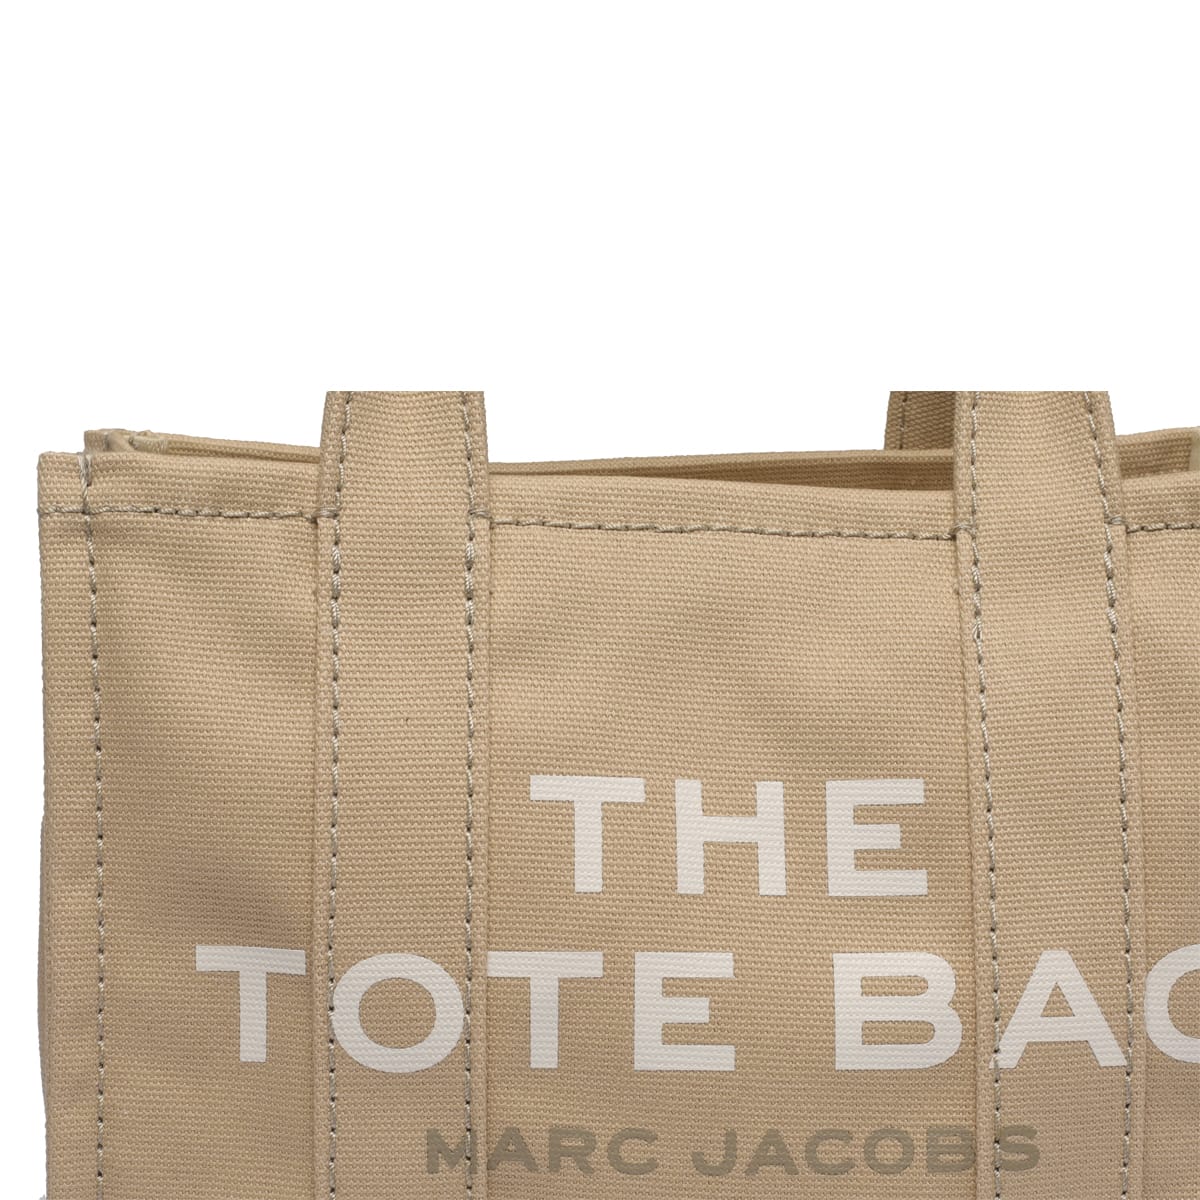 Shop Marc Jacobs The Small Tote Bag In Beige